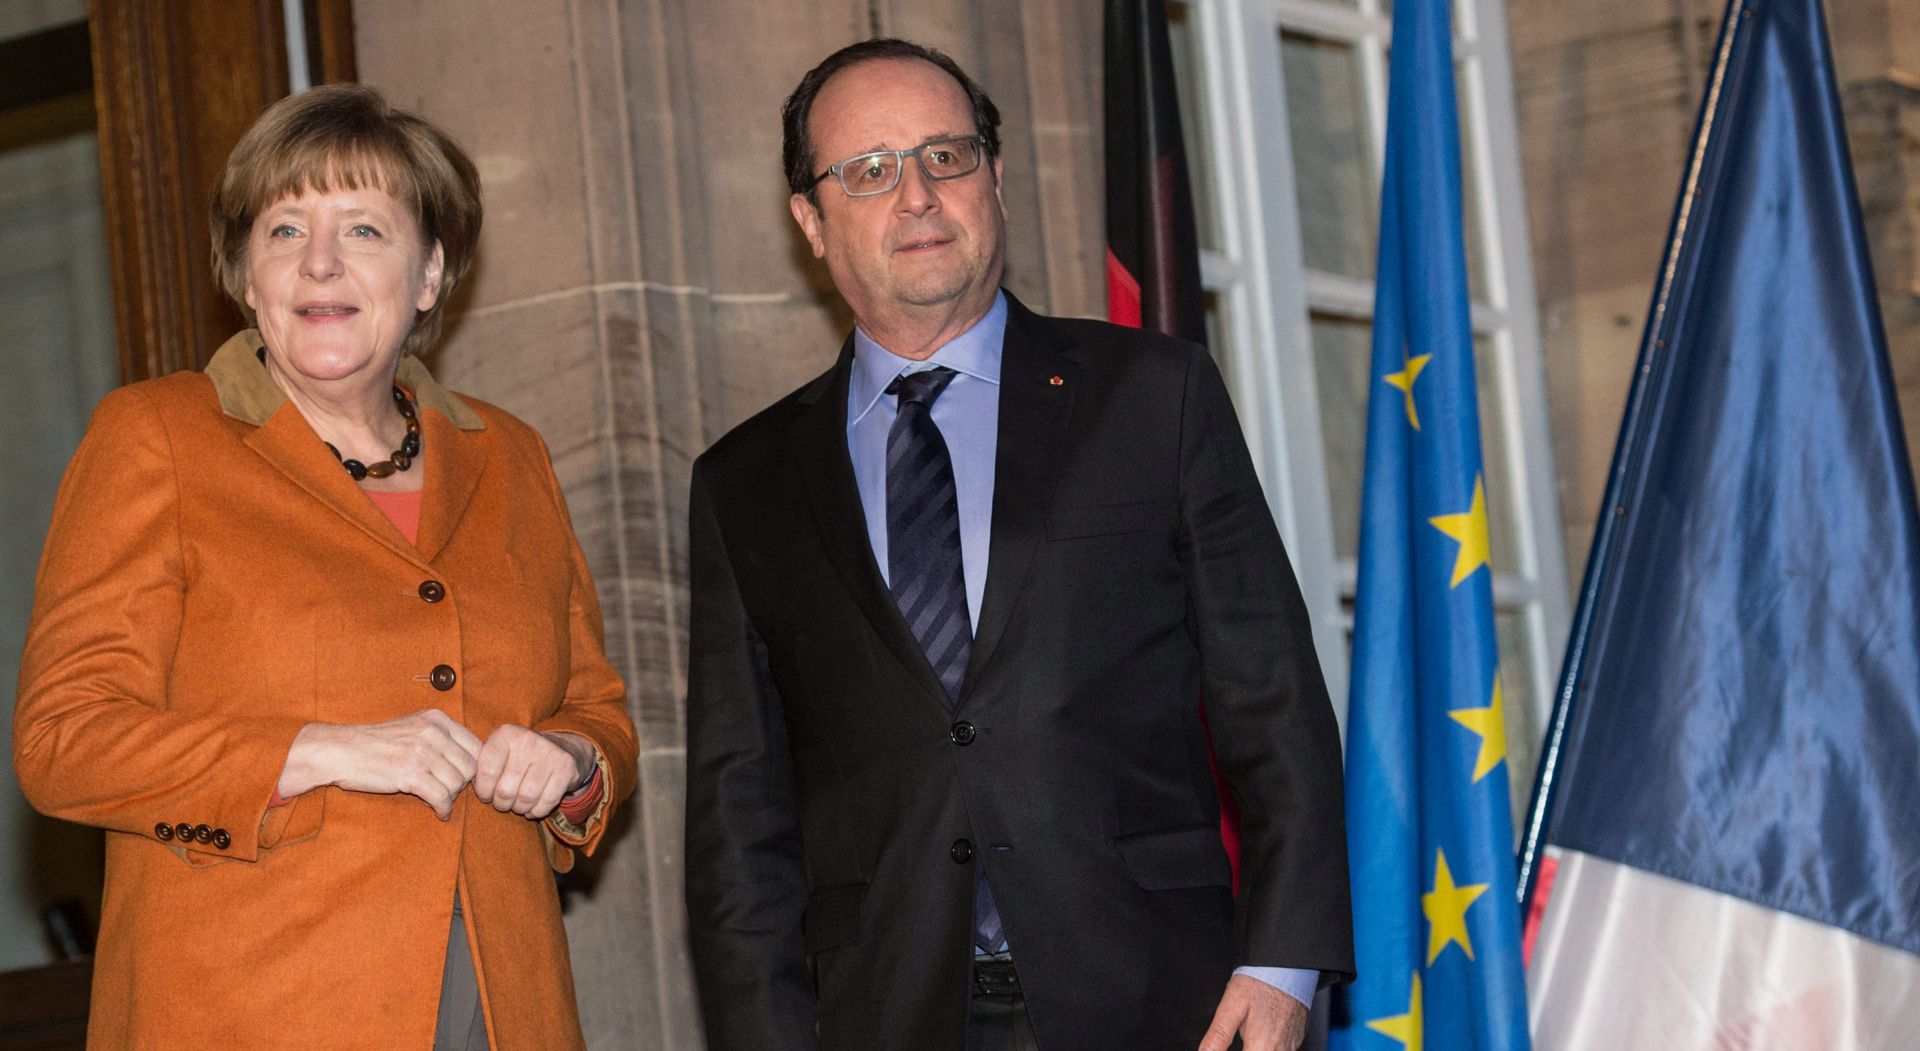 epa05148259 French President Francois Hollande (R) and German Chancellor Angela Merkel (L) prepare for their meeting at the Prefecture in Strasbourg, France, 07 February 2016. Hollande, Merkel and European Parliament President Martin Schulz are meeting for talks in Strasbourg on the eve of Merkel's visit to Ankara, Turkey, as part of her bid to curb migration to Europe.  EPA/PARTICK SEEGER / POOL MAXPPP OUT